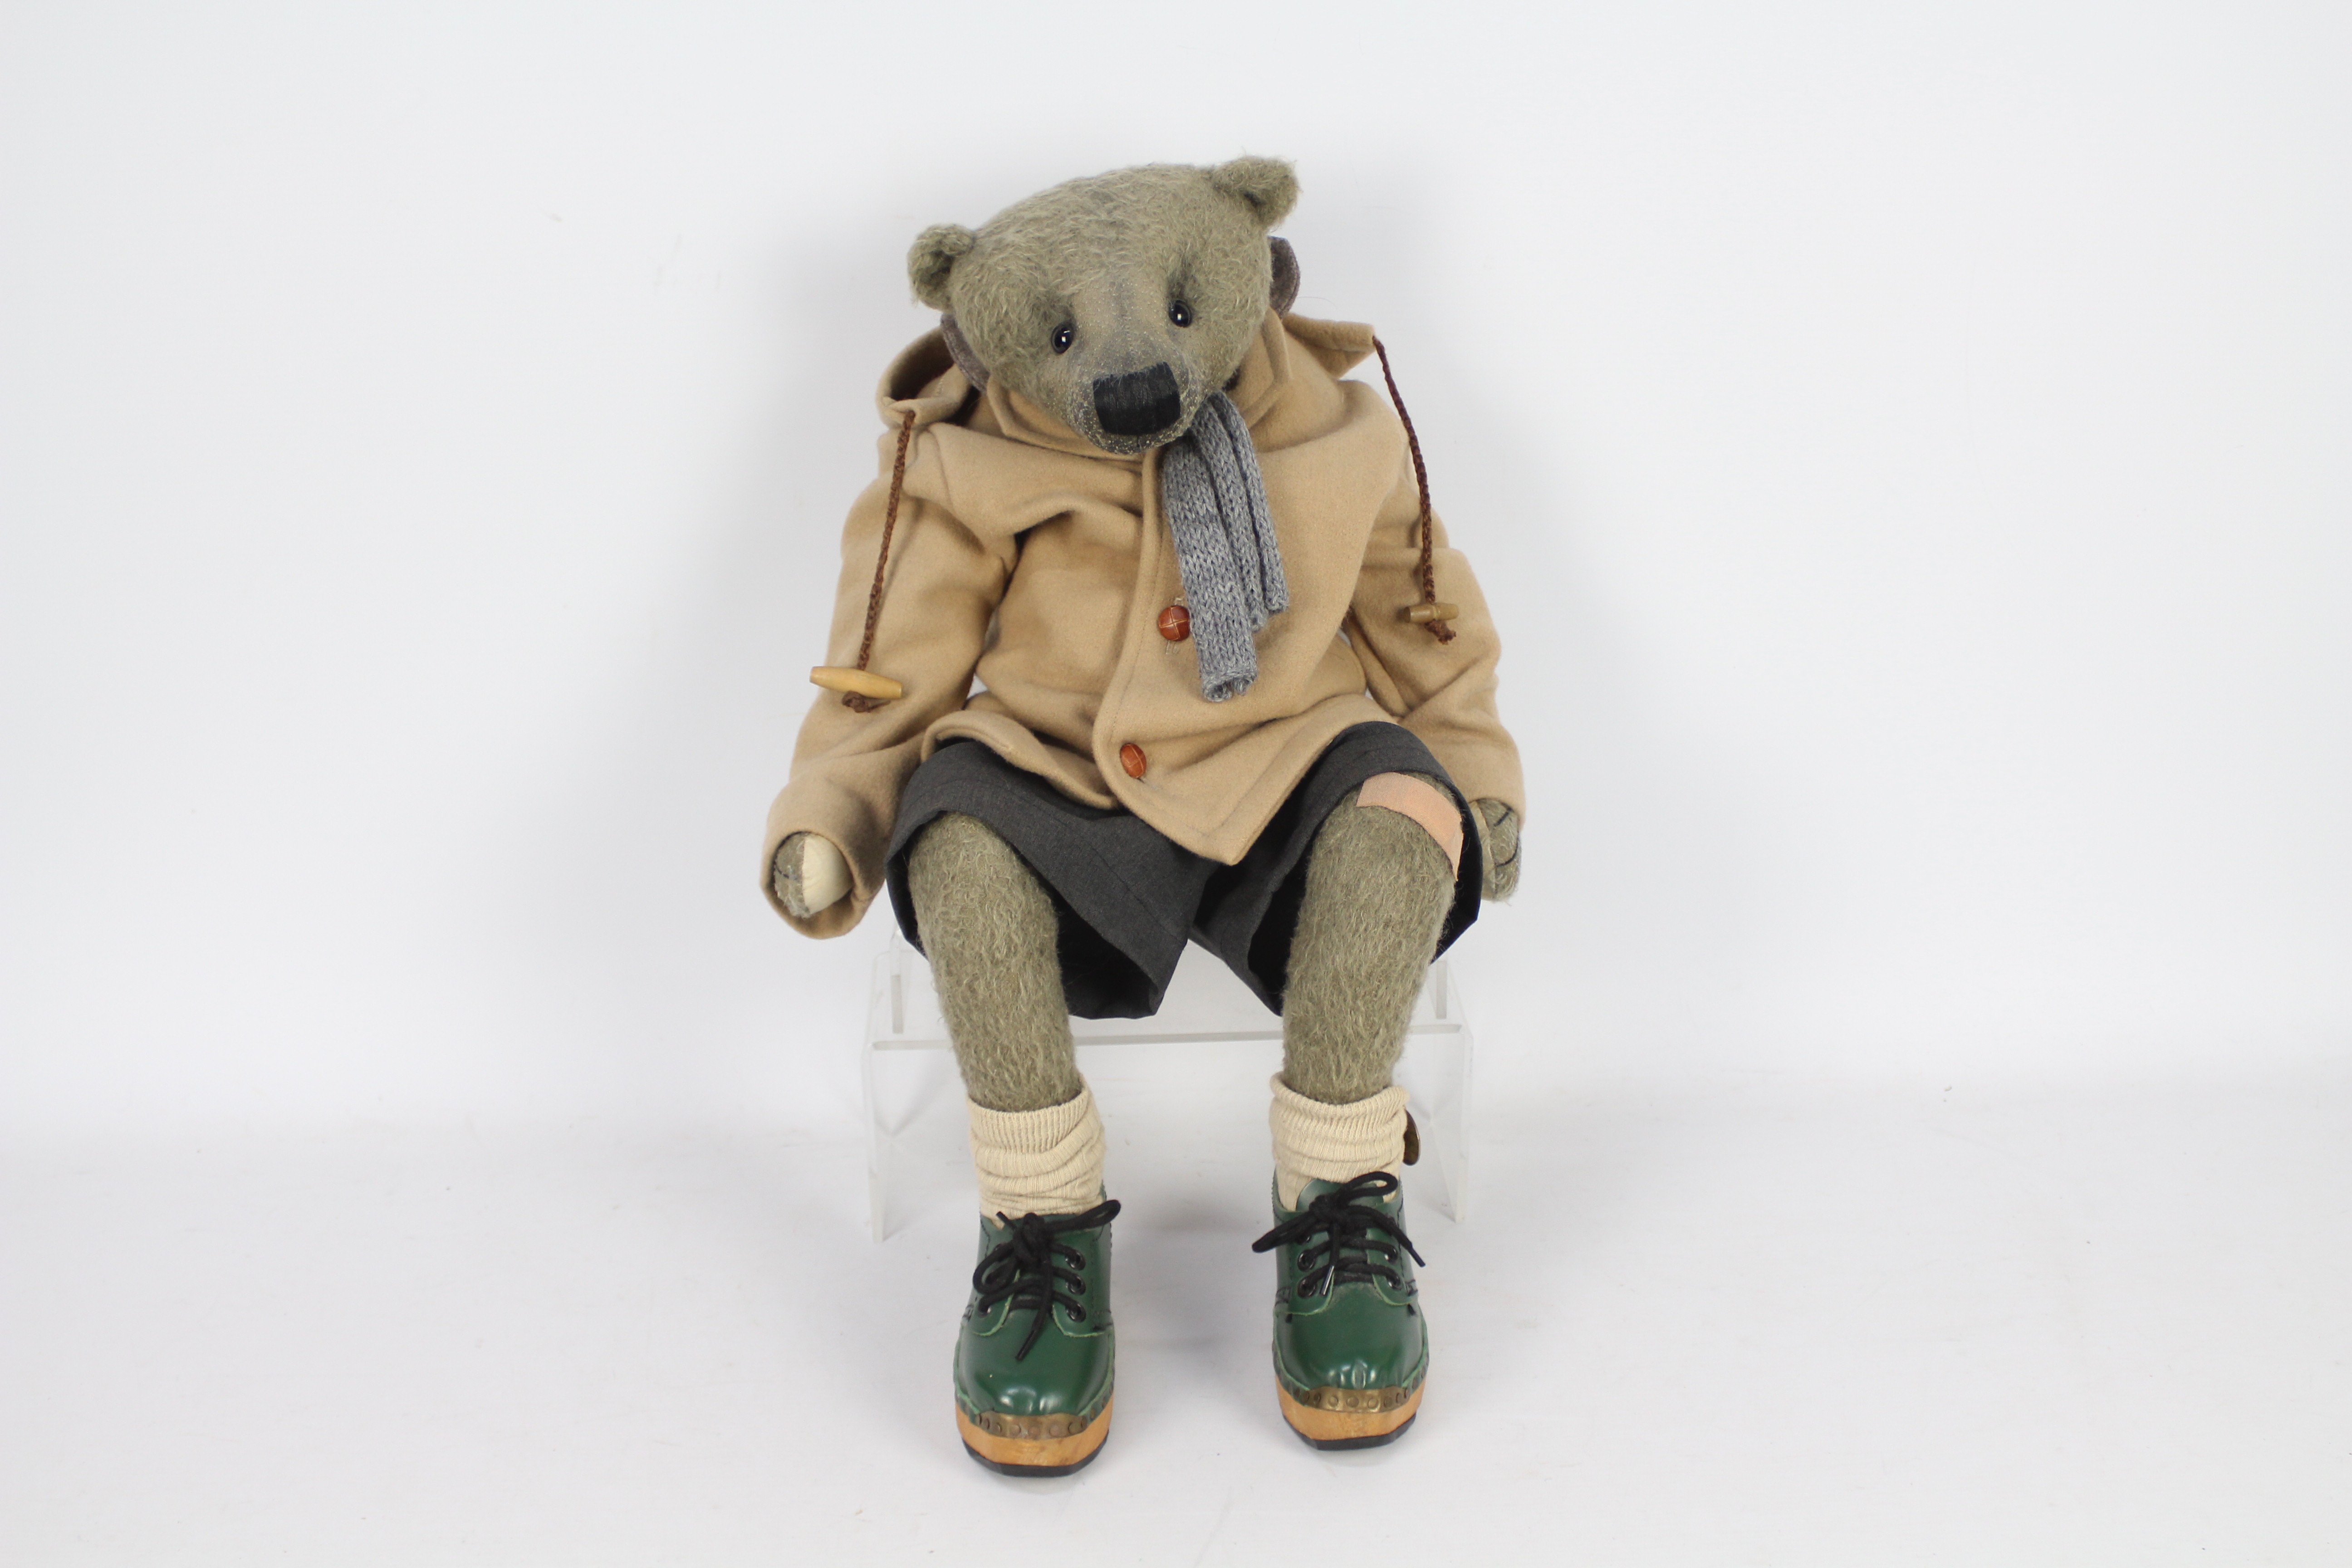 Parkside Bears - A large seated jointed bear called Walt made by Parkside Bears.